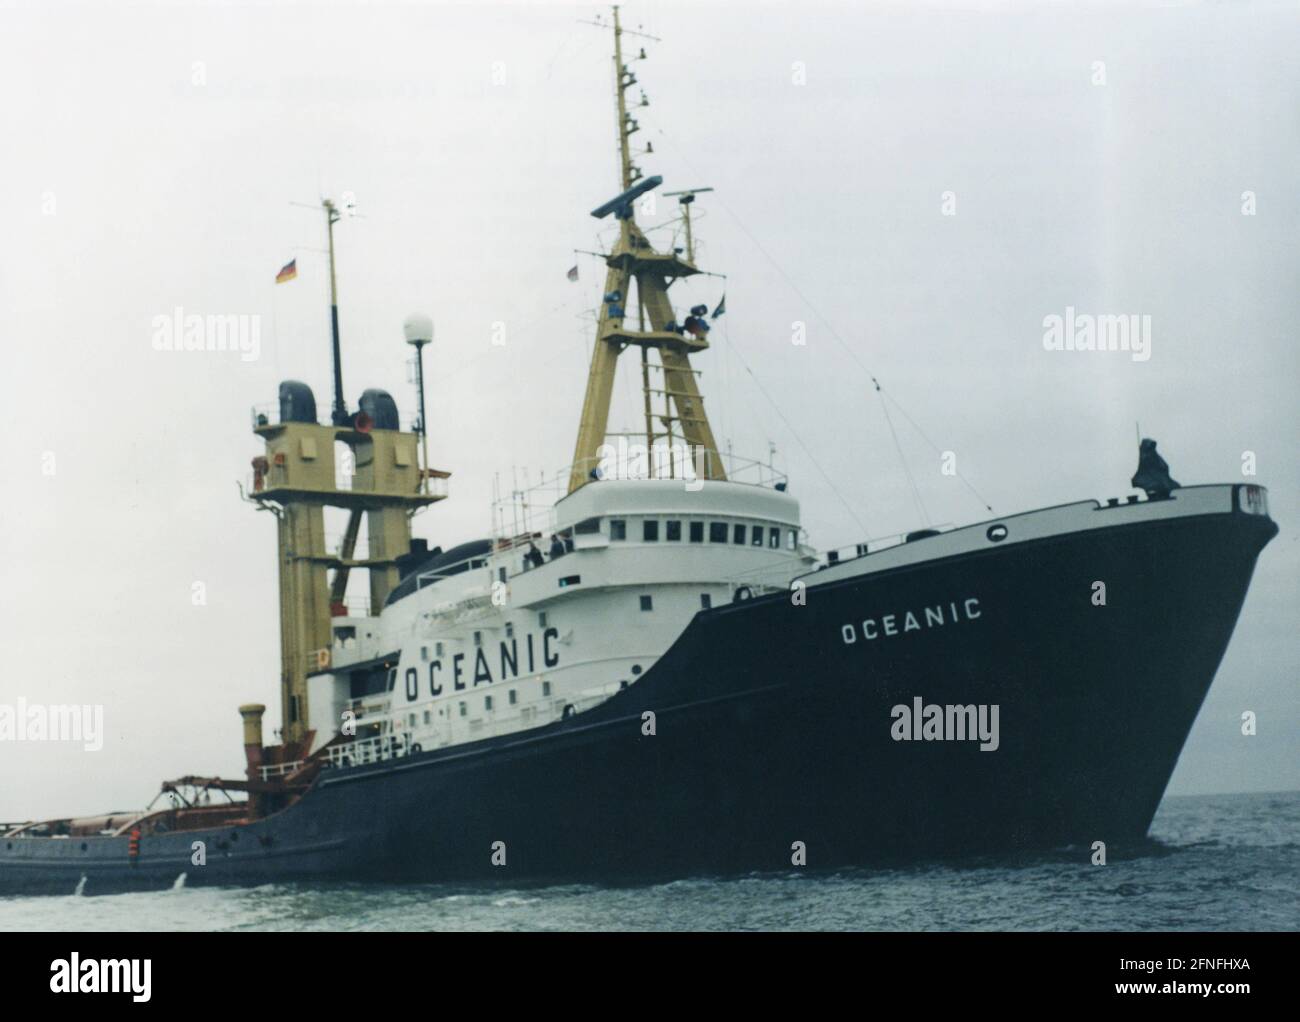 'The salvage tug ''Oceanic'' was used from 1969 to 2011 by the Bugsier shipping company in Hamburg, mainly in the German Bight, to tow aground ships free. [automated translation]' Stock Photo